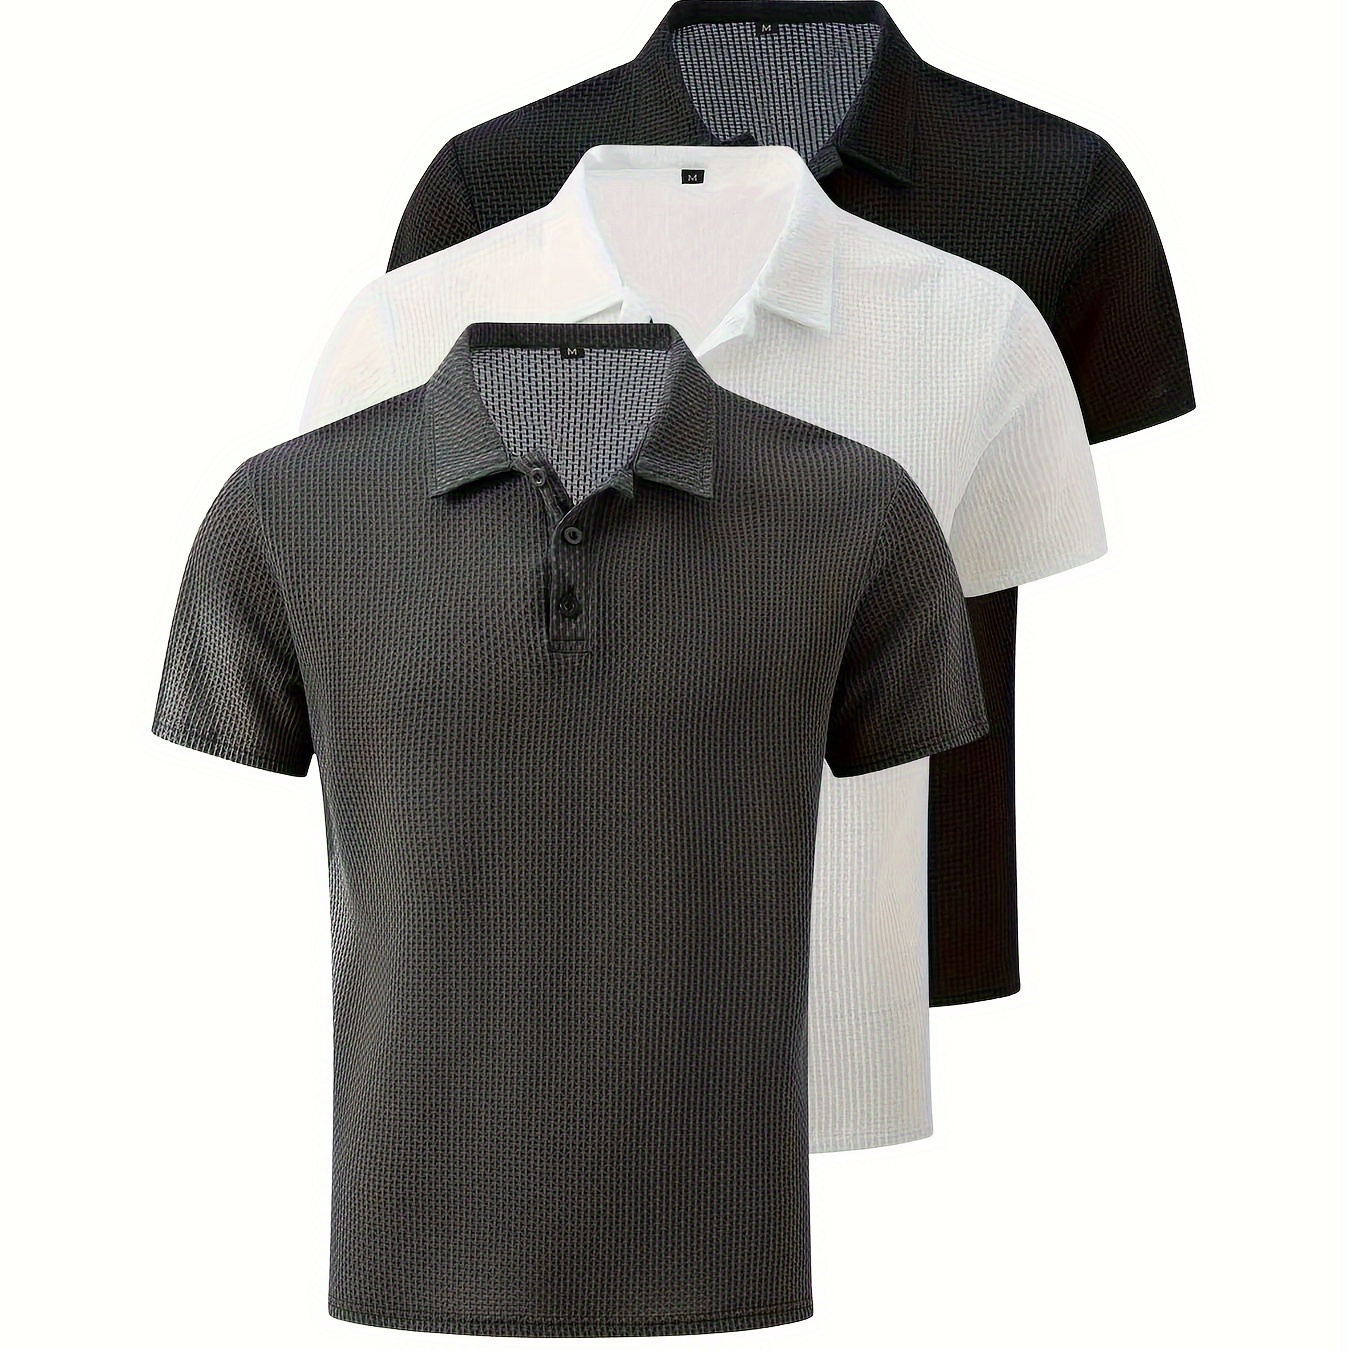 

3-pack Men's Summer Short Sleeve Golf Shirts With Collar, Casual Style, Stretchy Cool Comfortable Breathable Quick-dry Golf Shirts